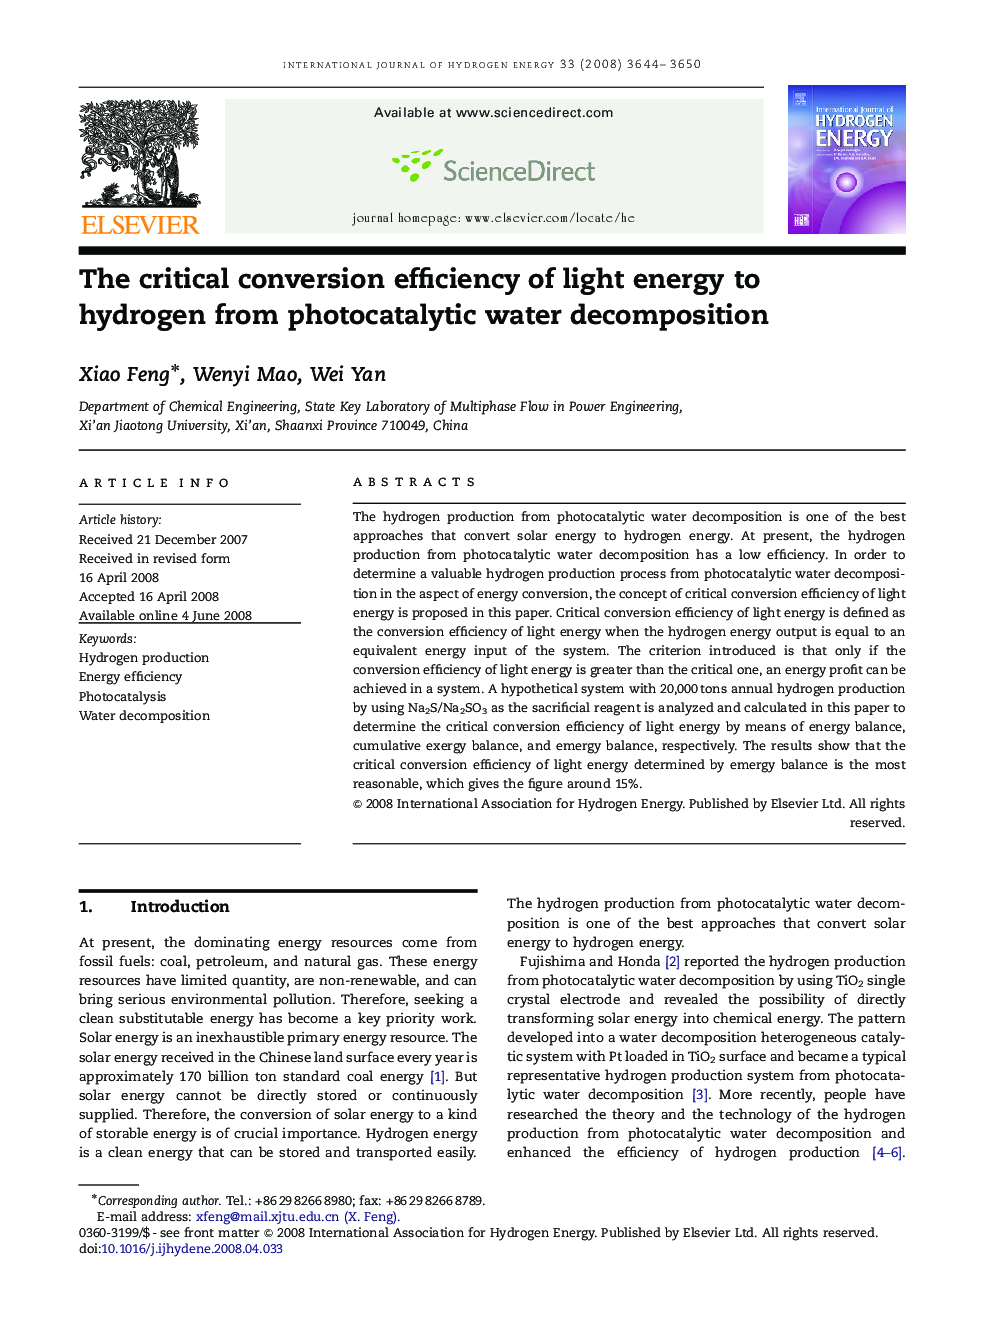 The critical conversion efficiency of light energy to hydrogen from photocatalytic water decomposition